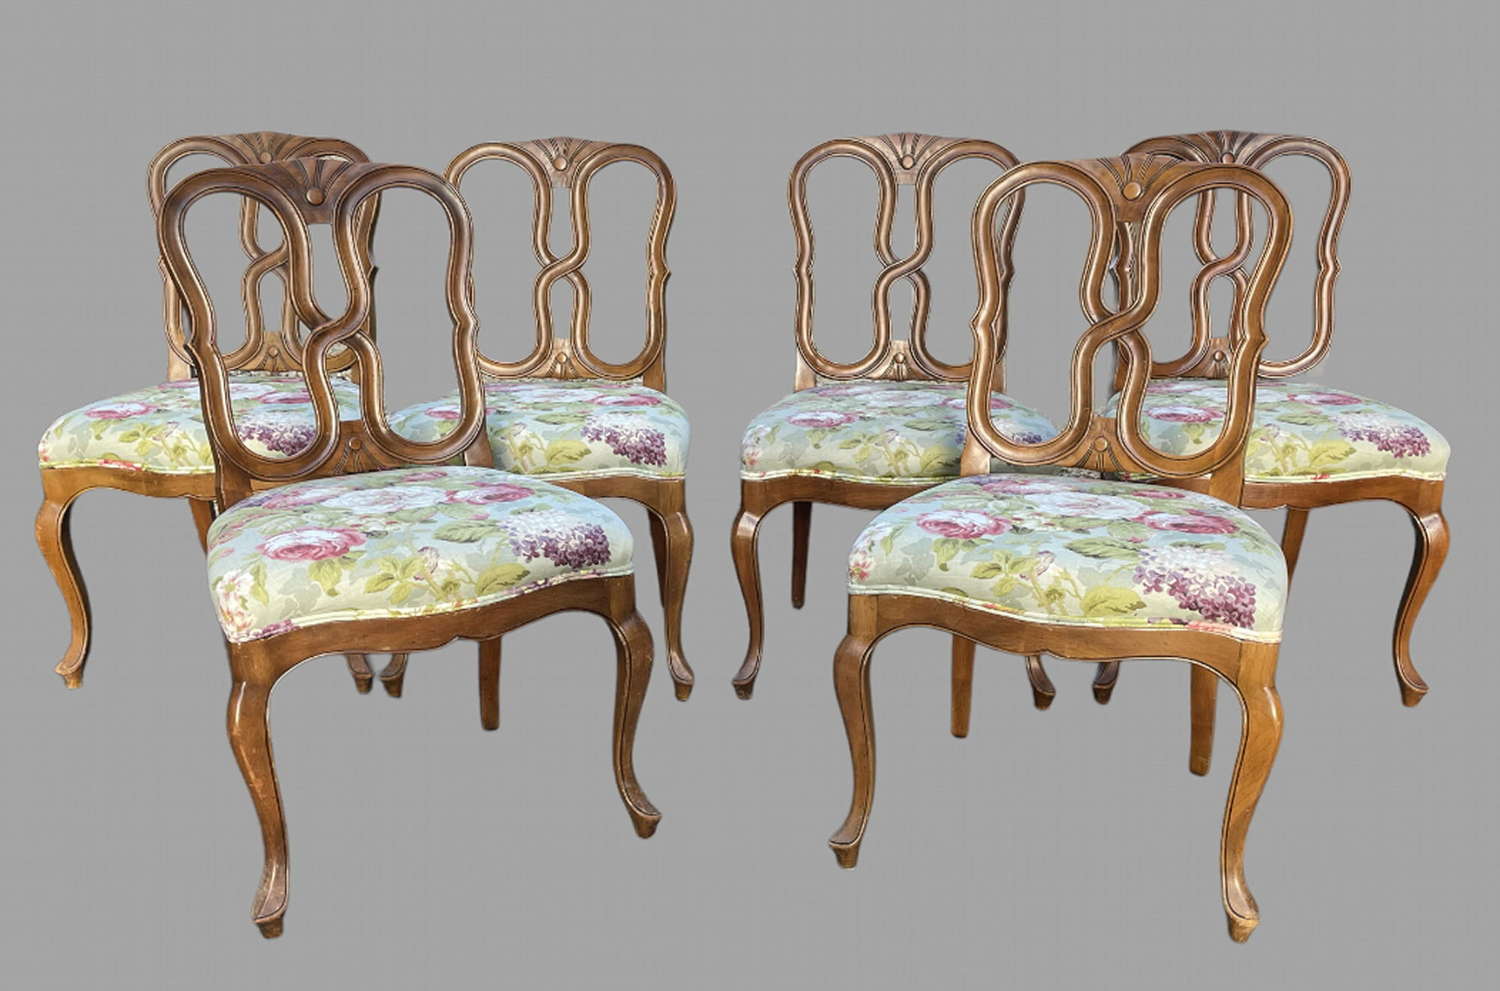 A Set of Six Fruitwood Dining Chairs